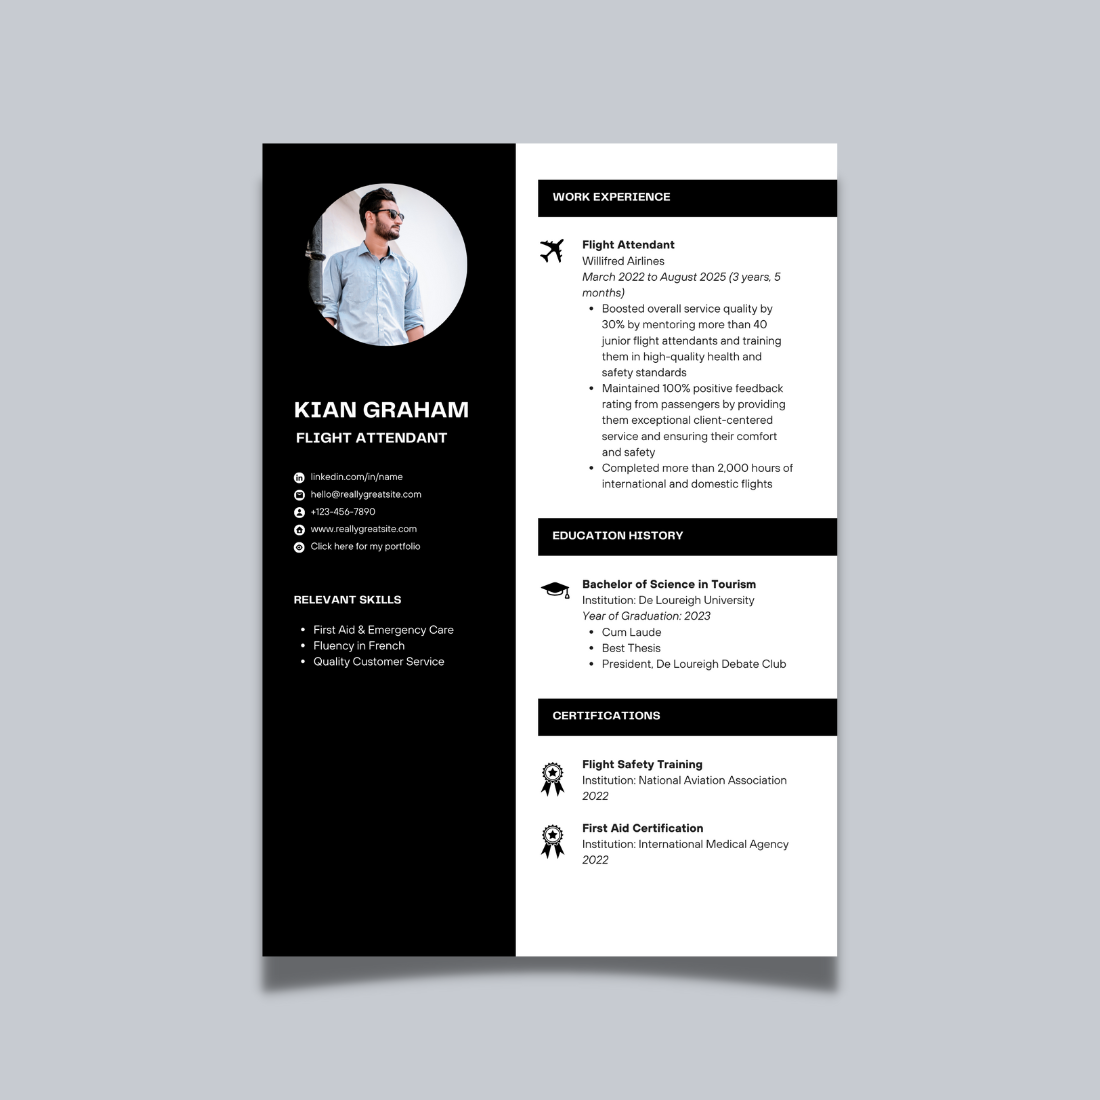 Black and white professional resume template.